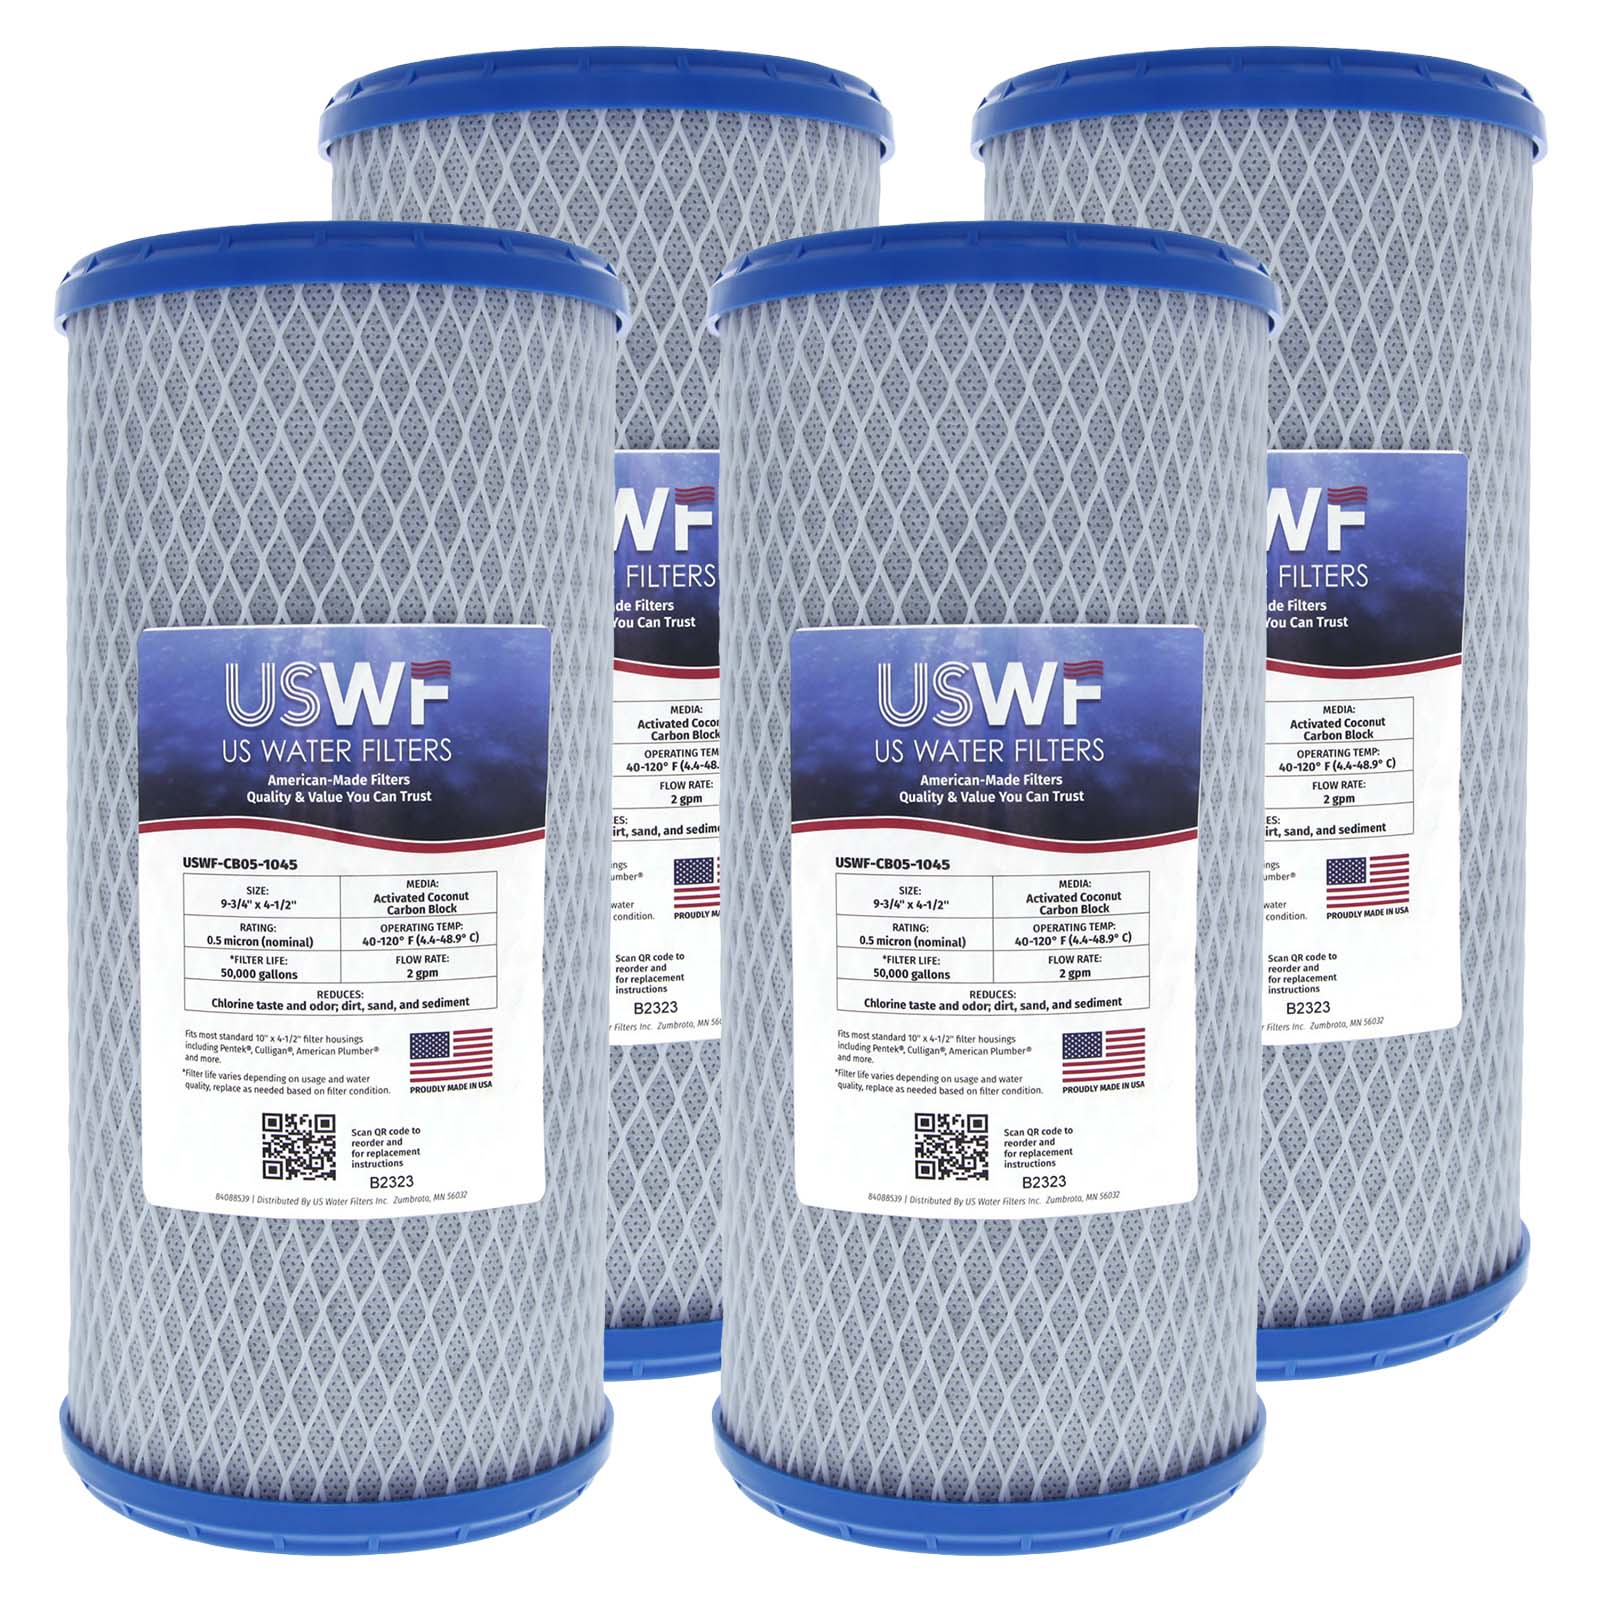 Coconut Carbon Block Filter by USWF 0.5 Micron 10"x4.5"